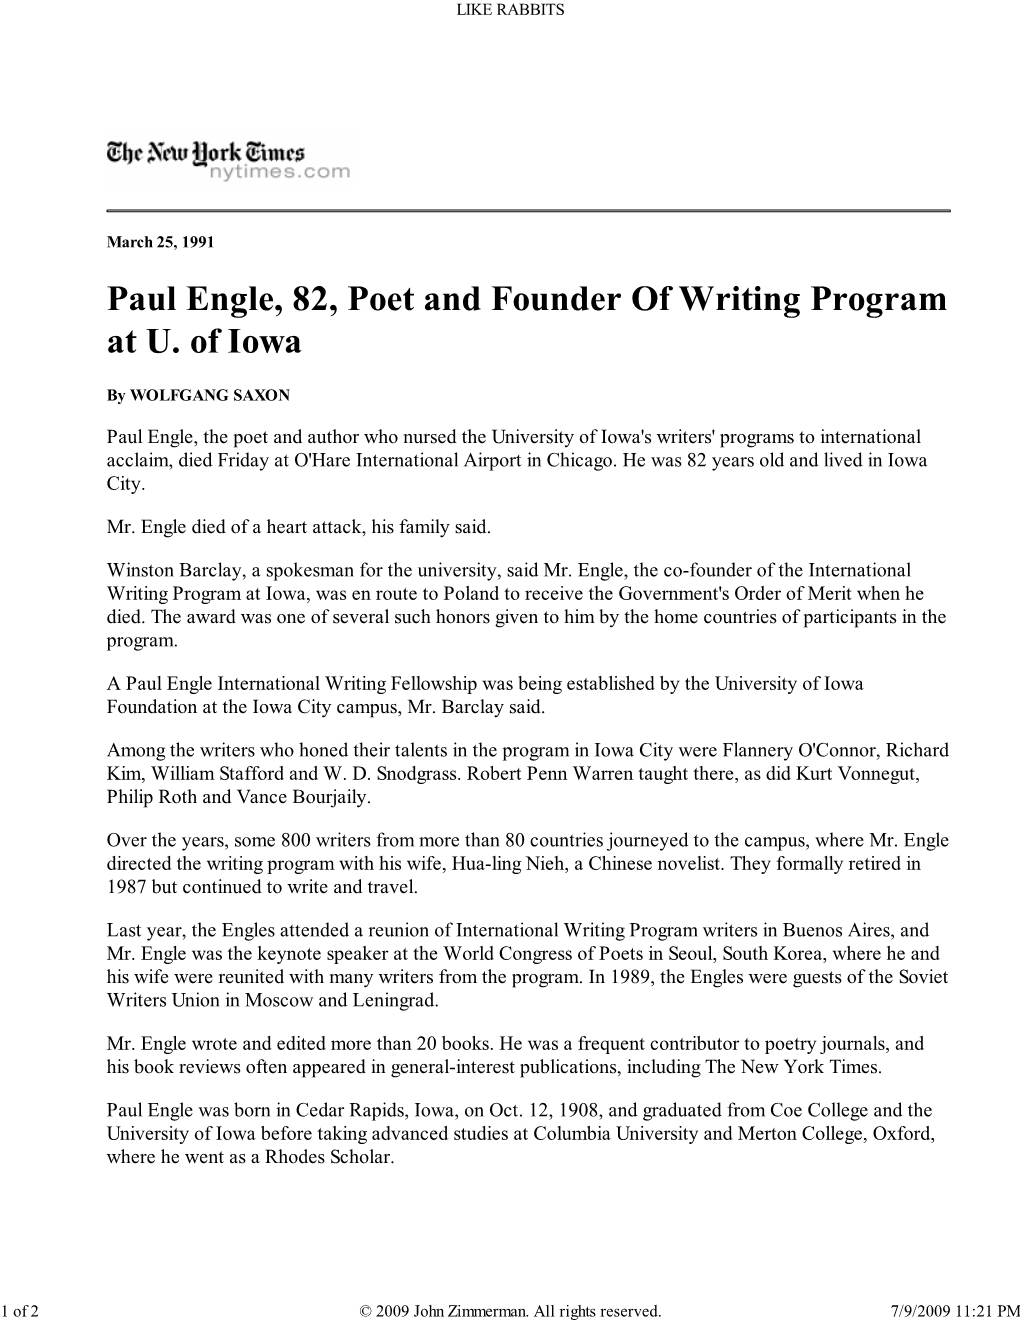 Paul Engle, 82, Poet and Founder of Writing Program at U